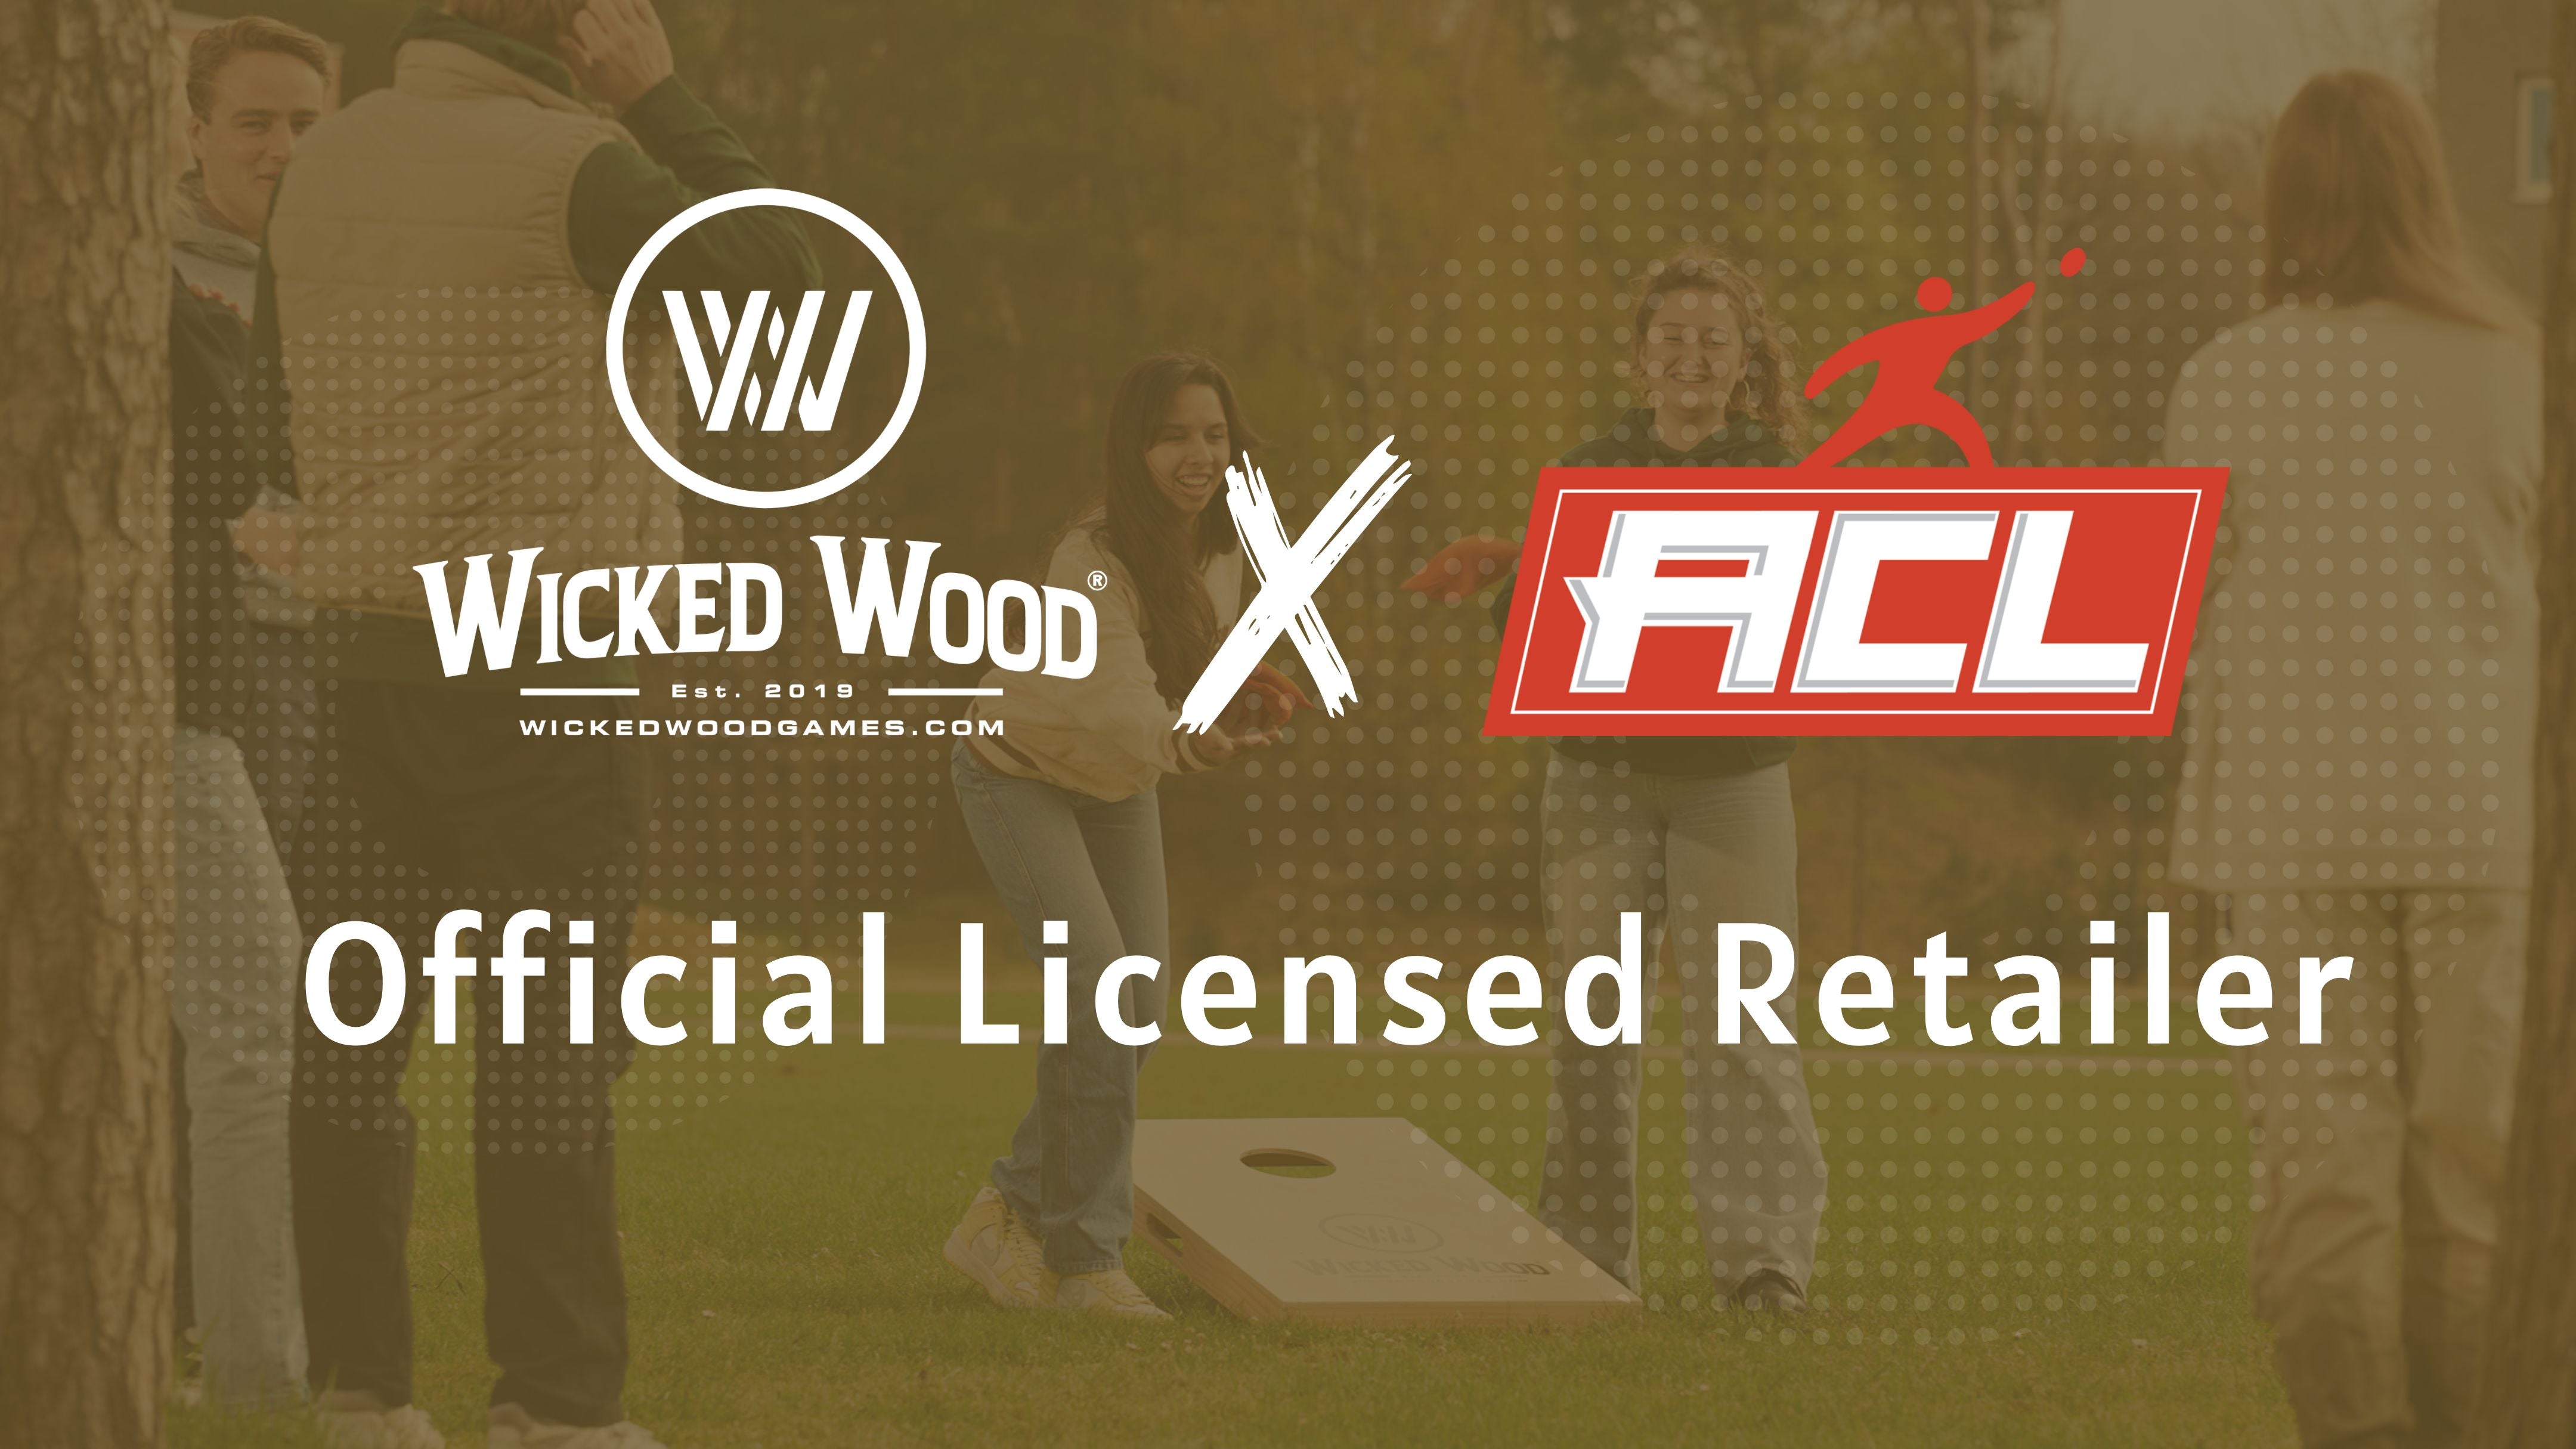 Wicked Wood is officially the first Licensed ACL Retailer in Europe